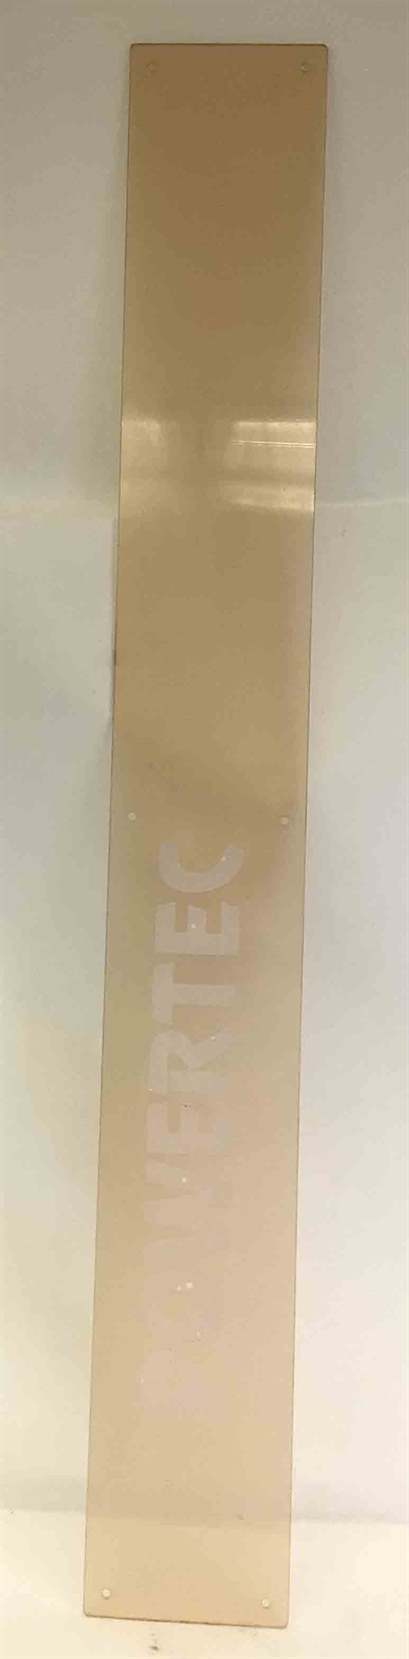 Machine Front  Cover Trim (Used)